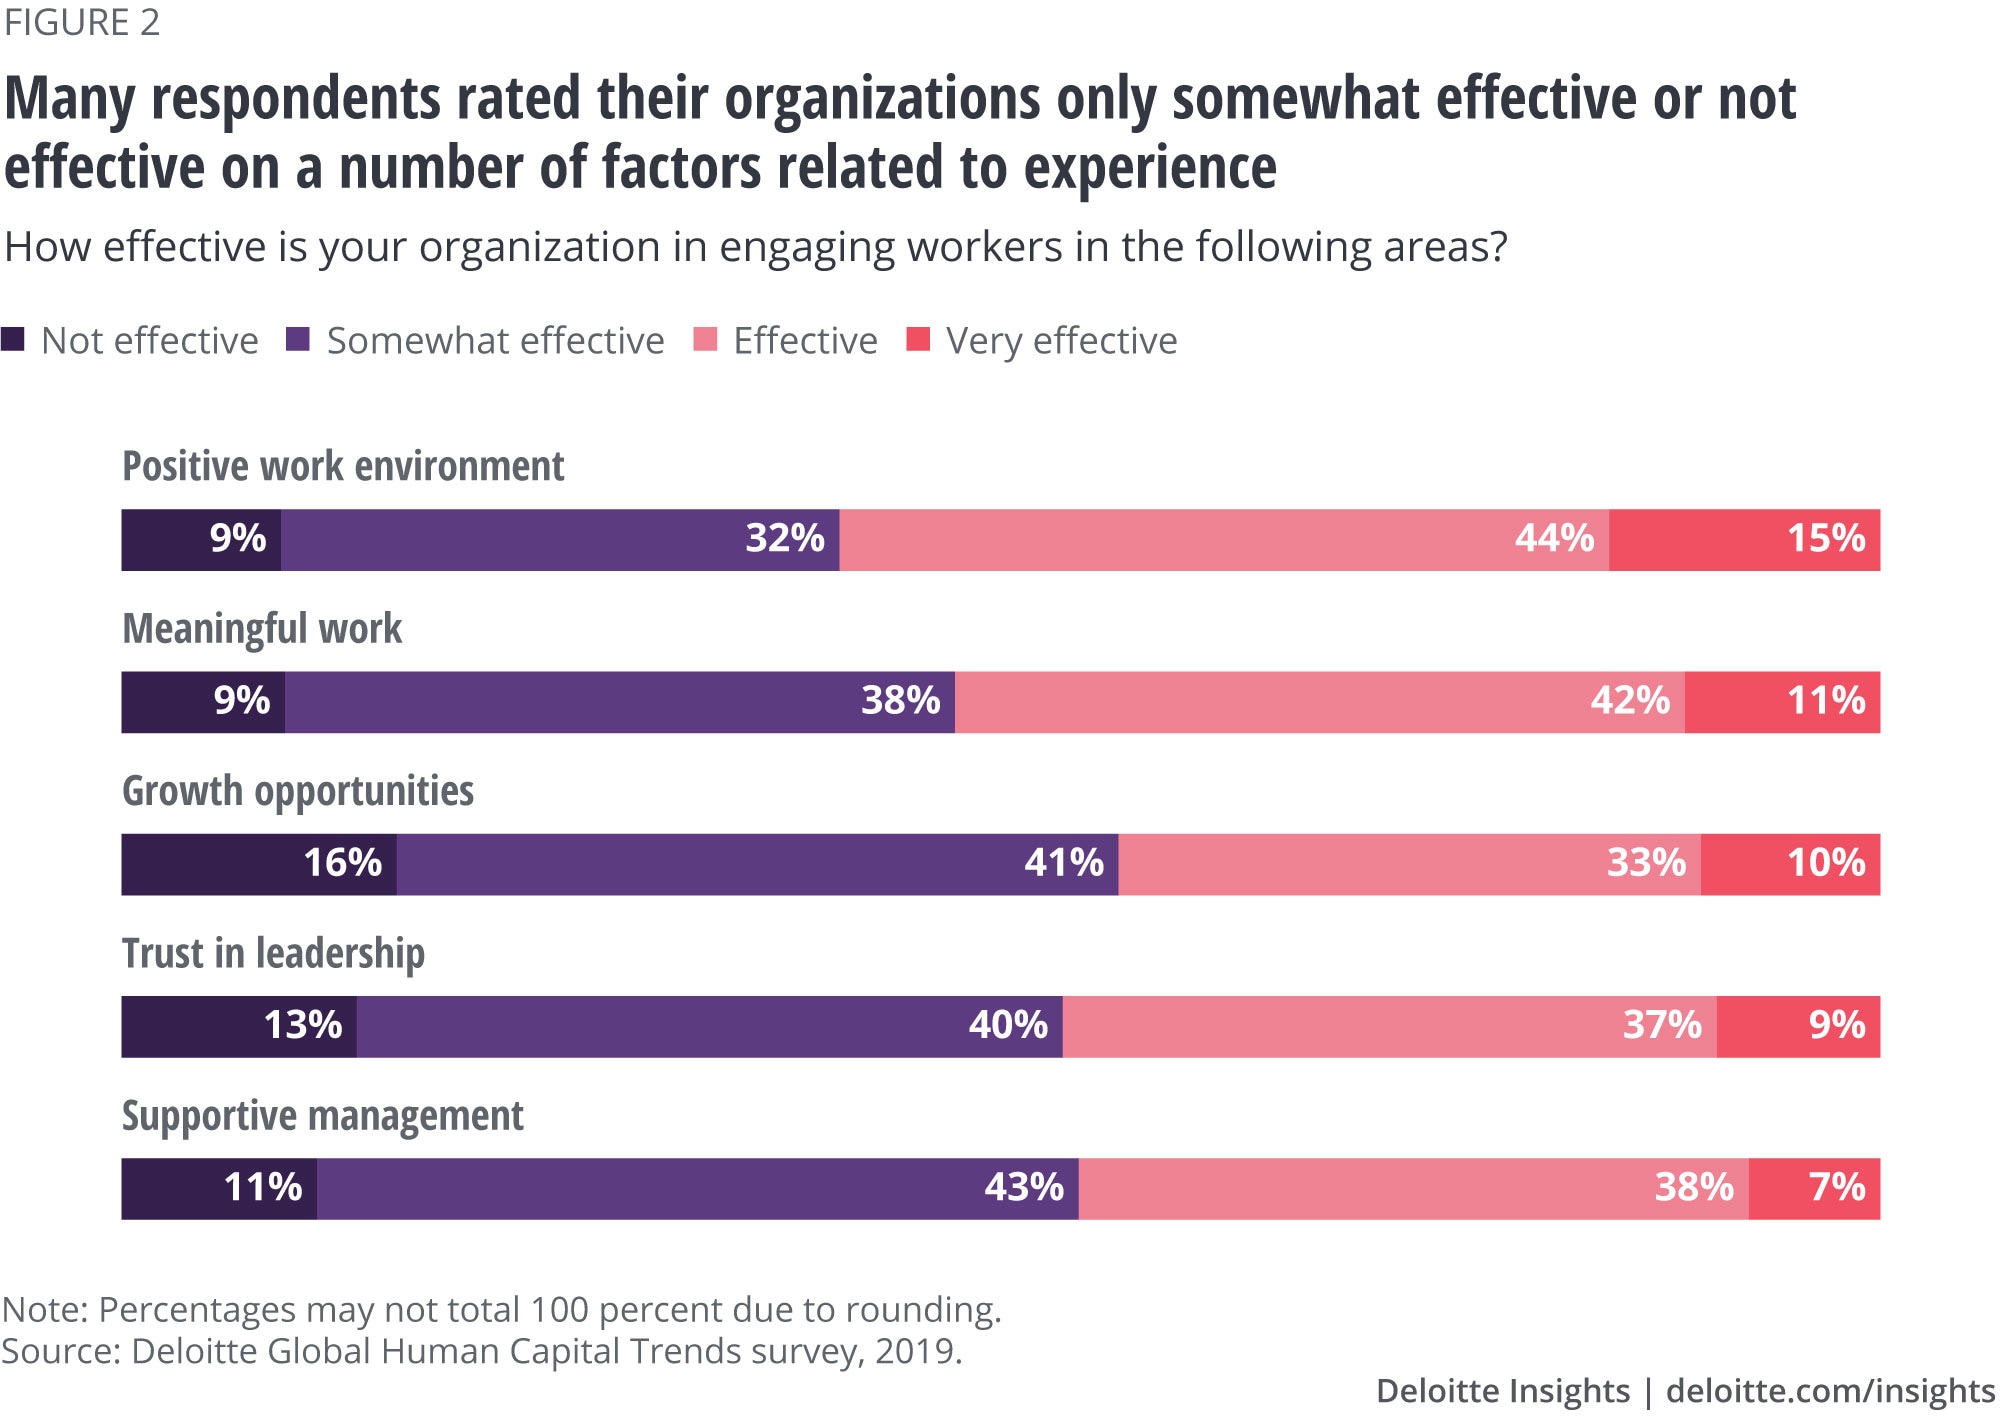 Many respondents rated their organizations only somewhat effective or not effective on a number of factors related to experience